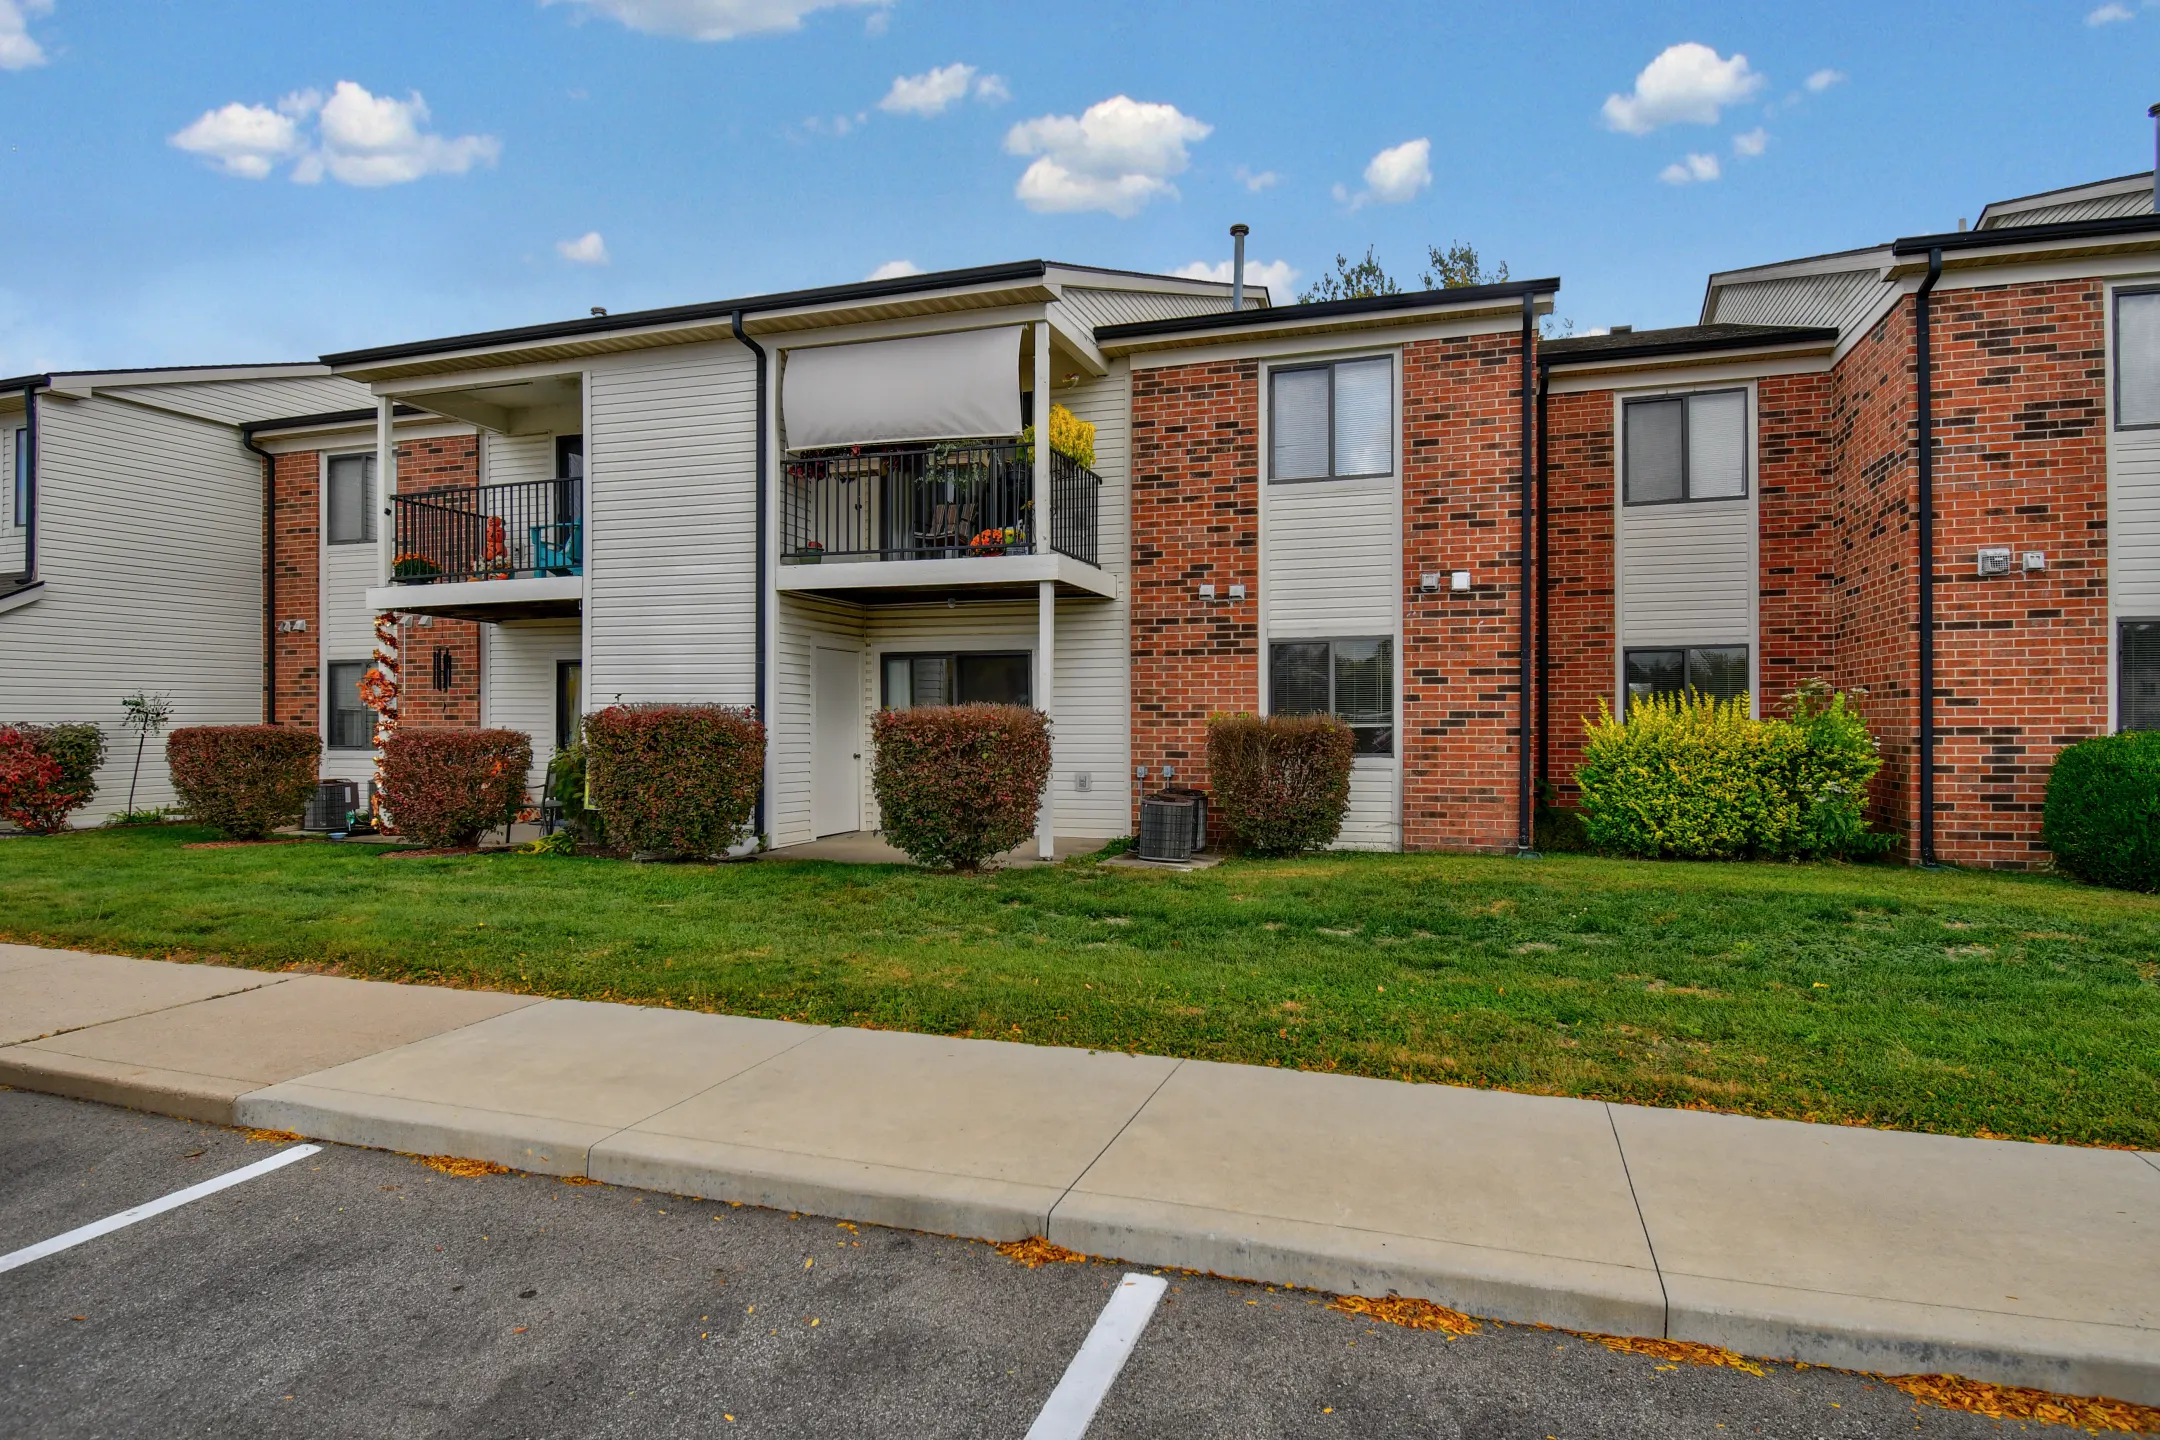 Building - Hickory Knoll Apartments - Anderson, IN